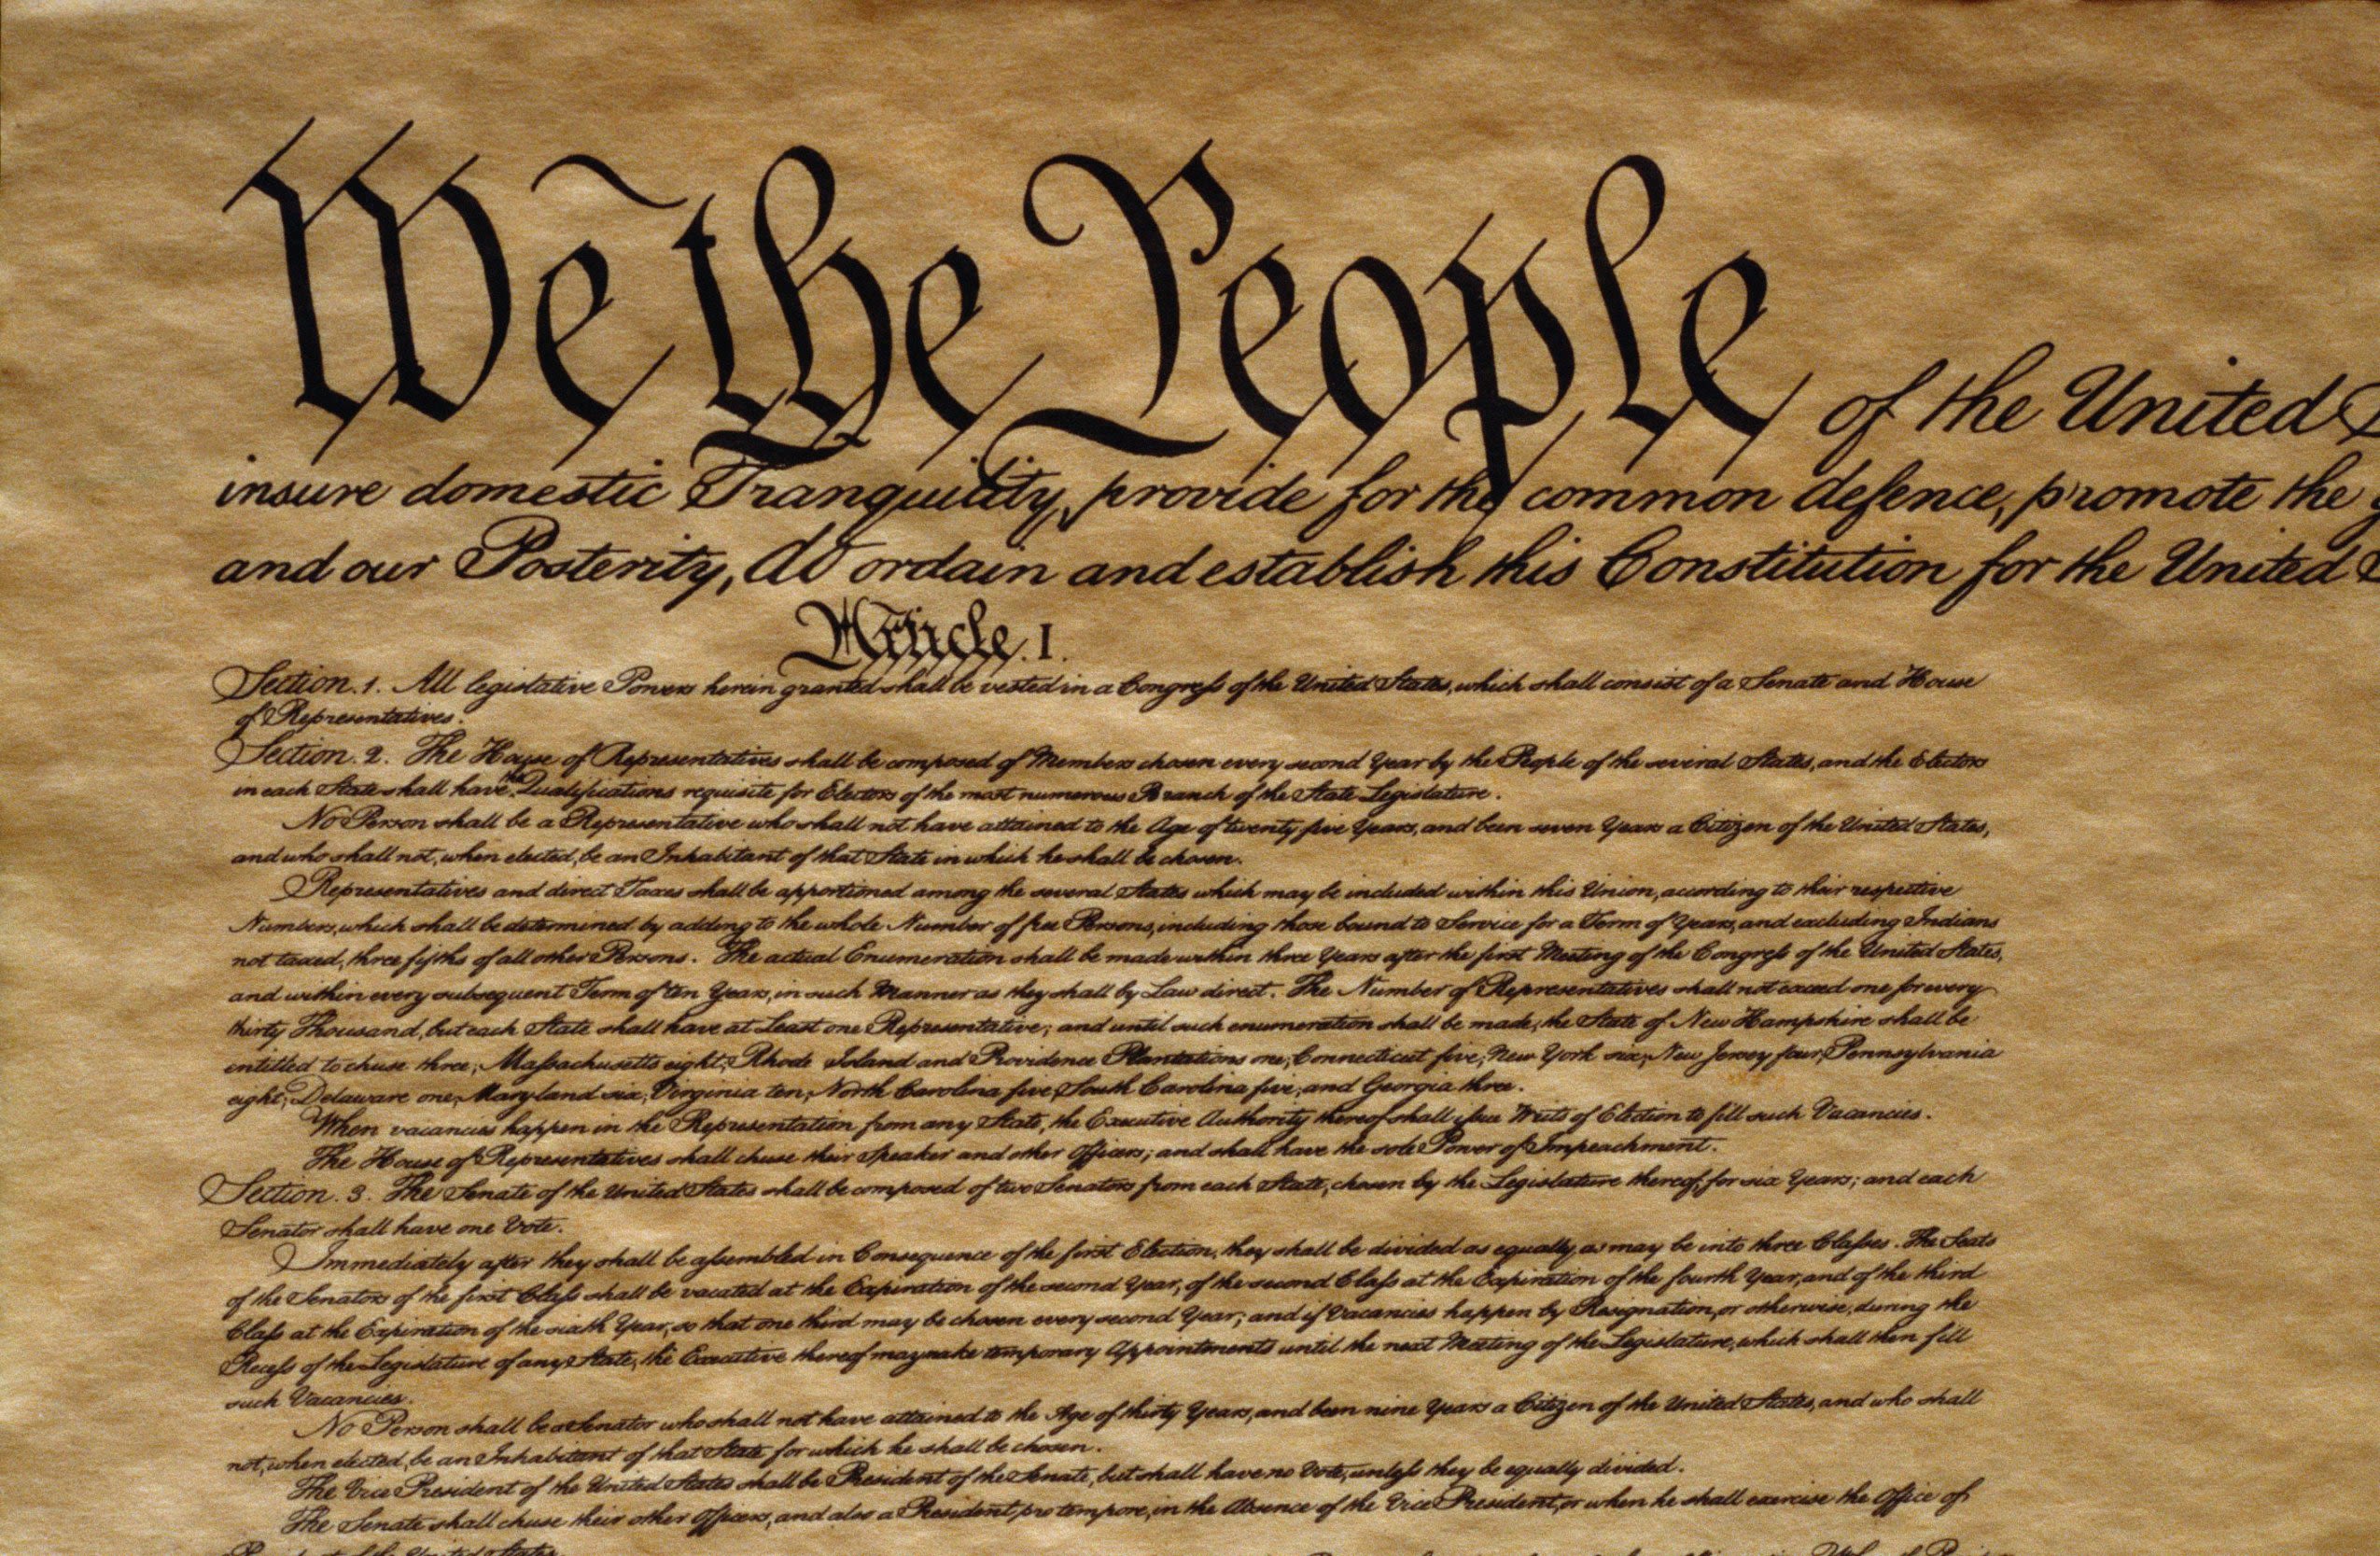 US Constitution Day: What are the 10 Constitutional Rights?